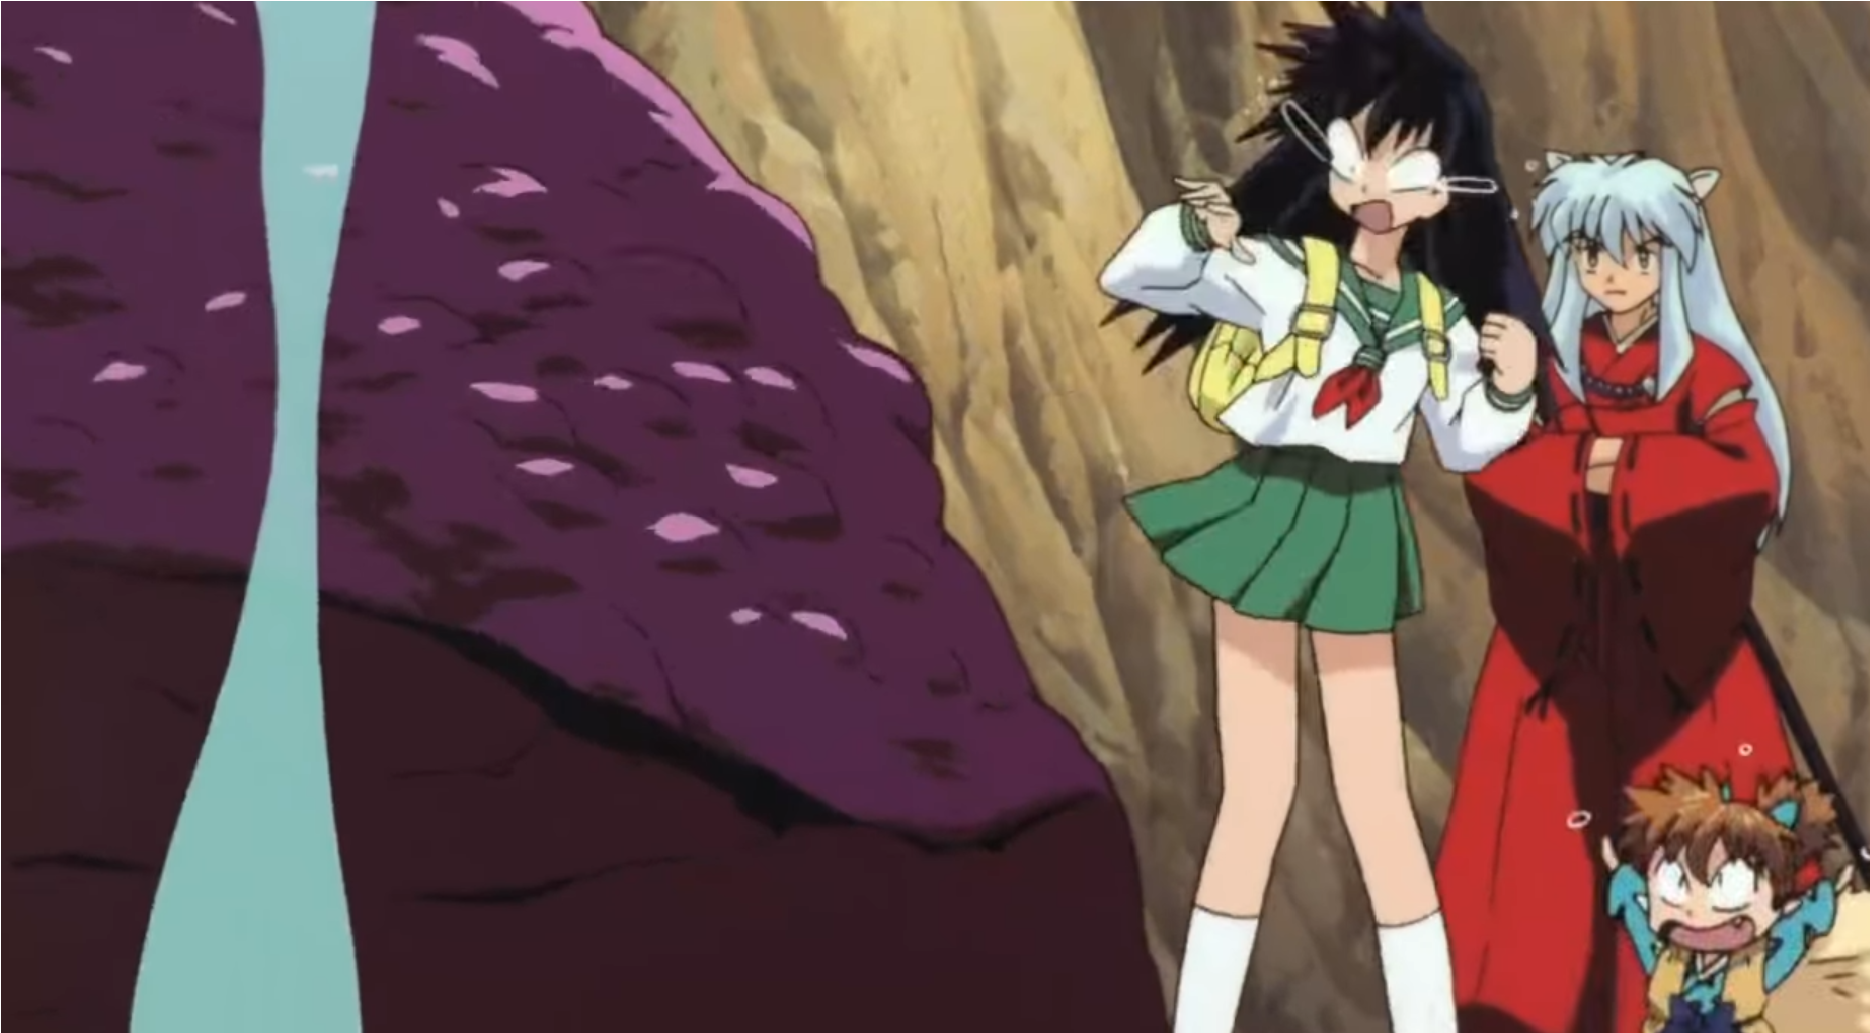 Inuyasha and Kagome in search of the Shikon Jewel